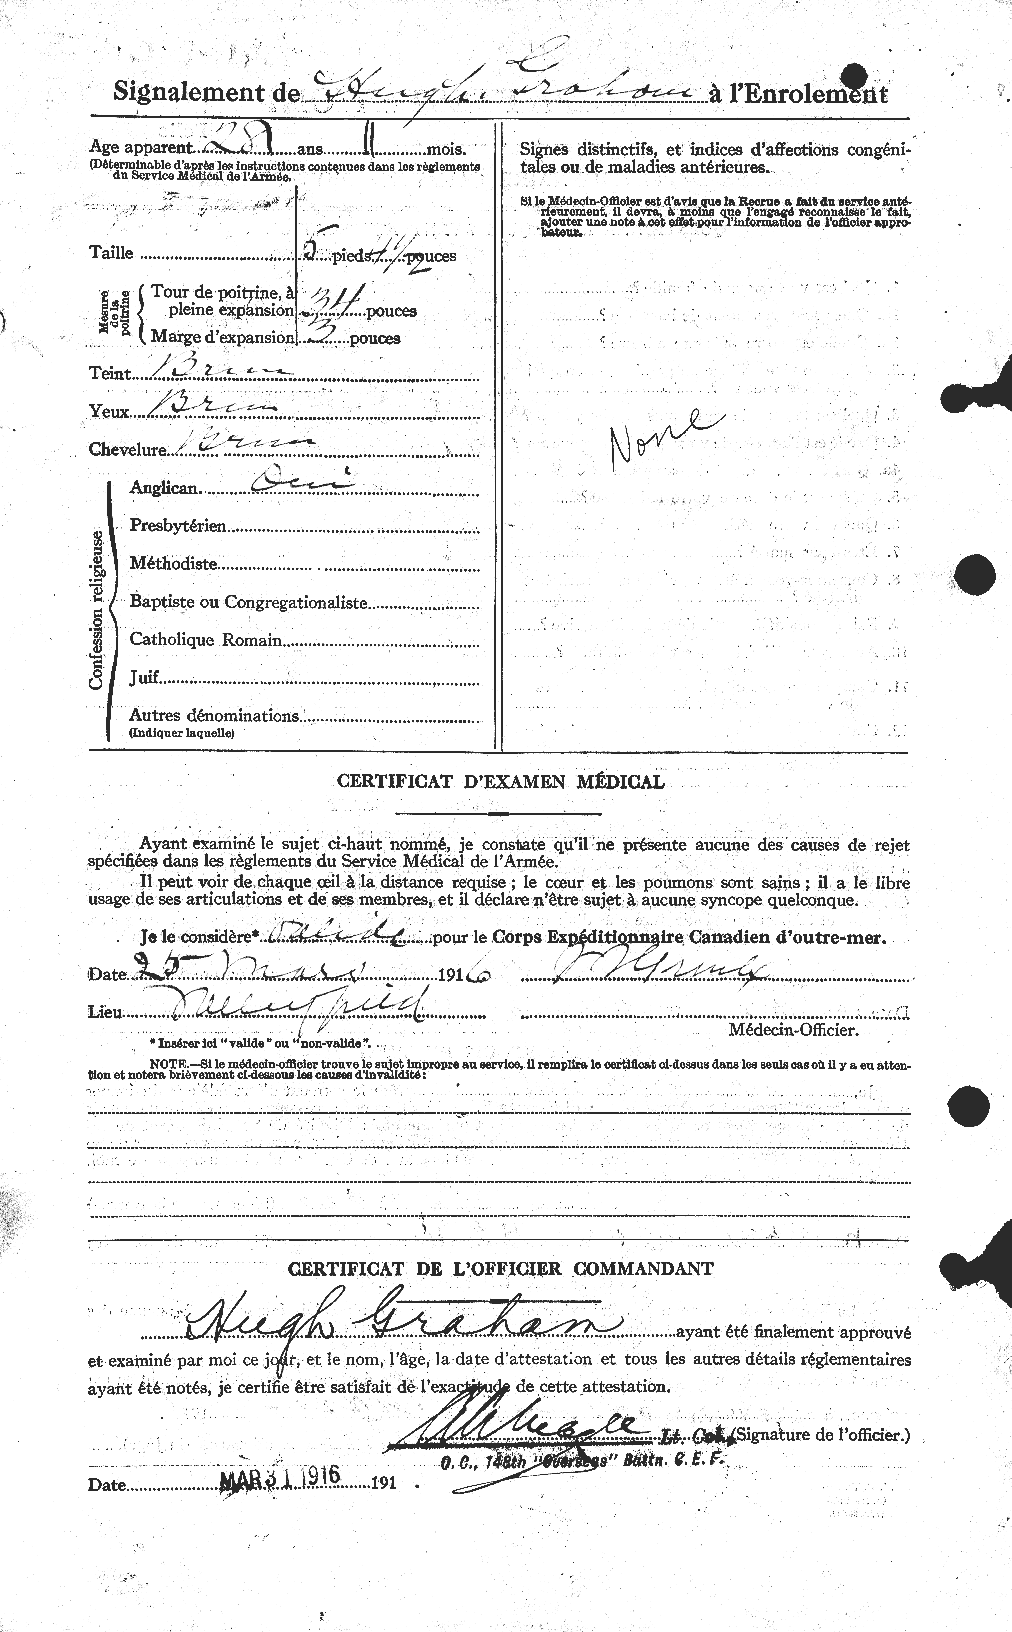 Personnel Records of the First World War - CEF 357758b